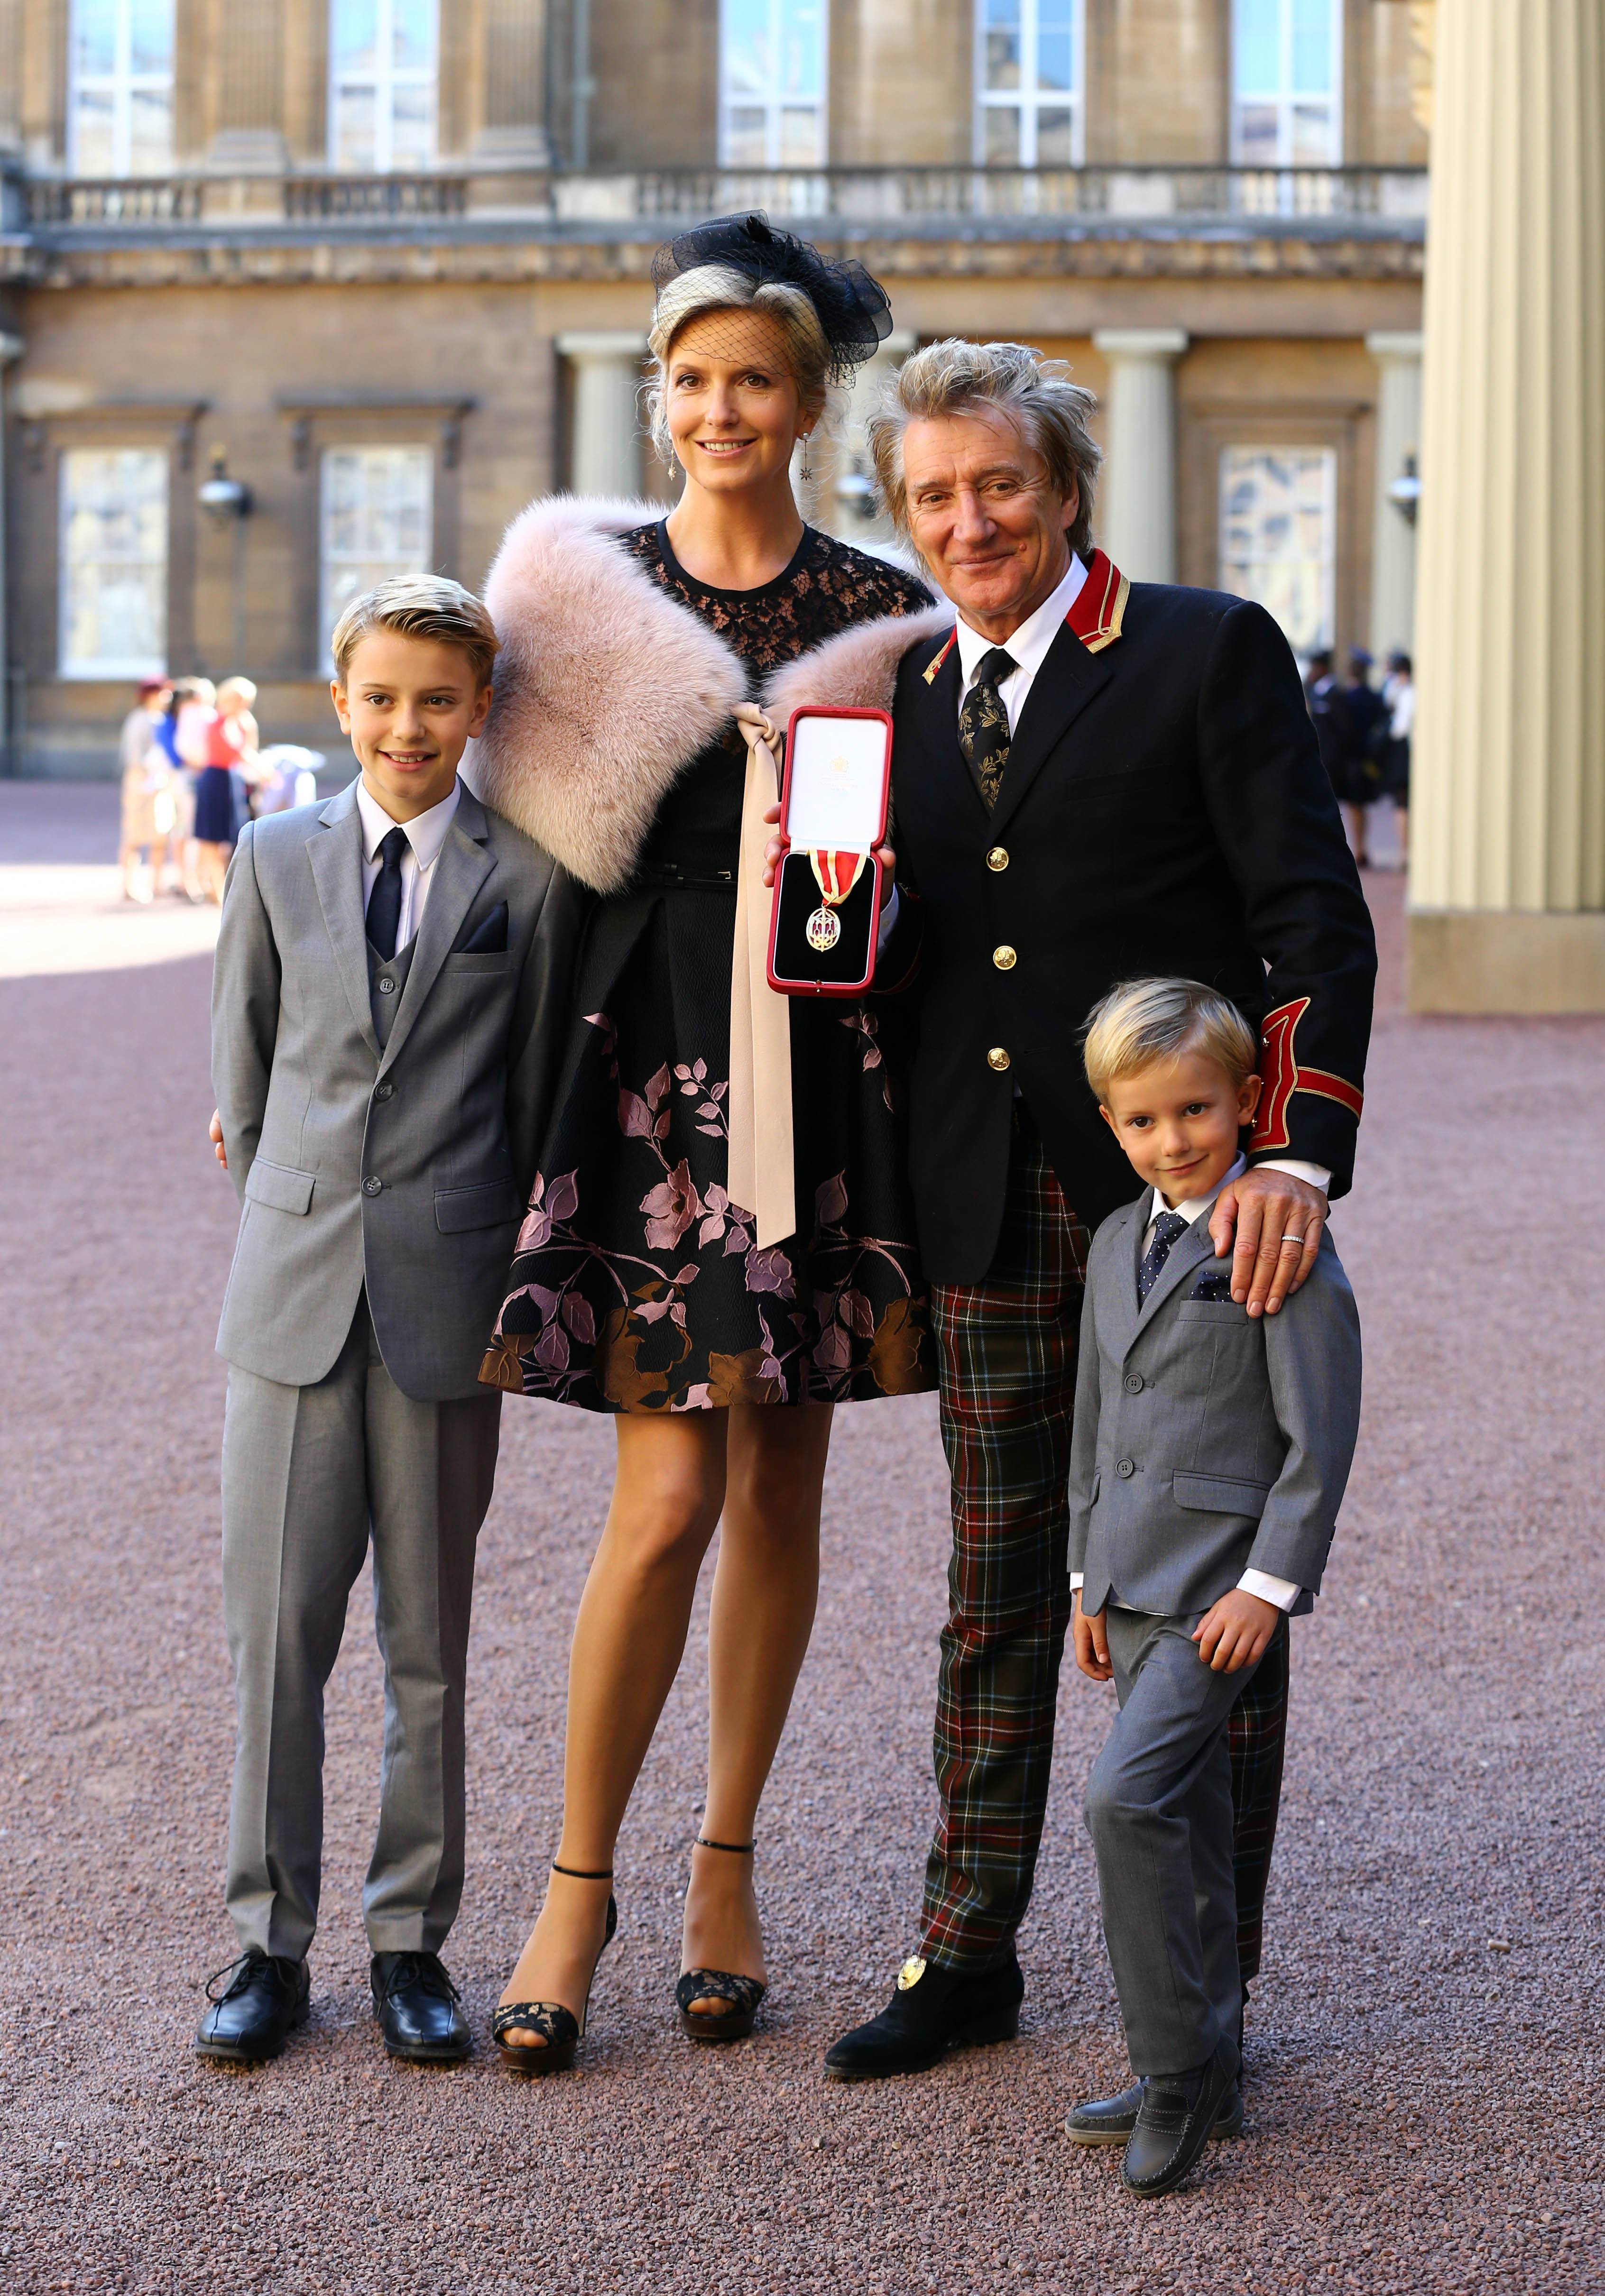 Penny Lancaster and Sir Rod Stewart with their sons, Alastair and Aiden Stewart in London, England on October 11, 2016 | Source: Getty Images